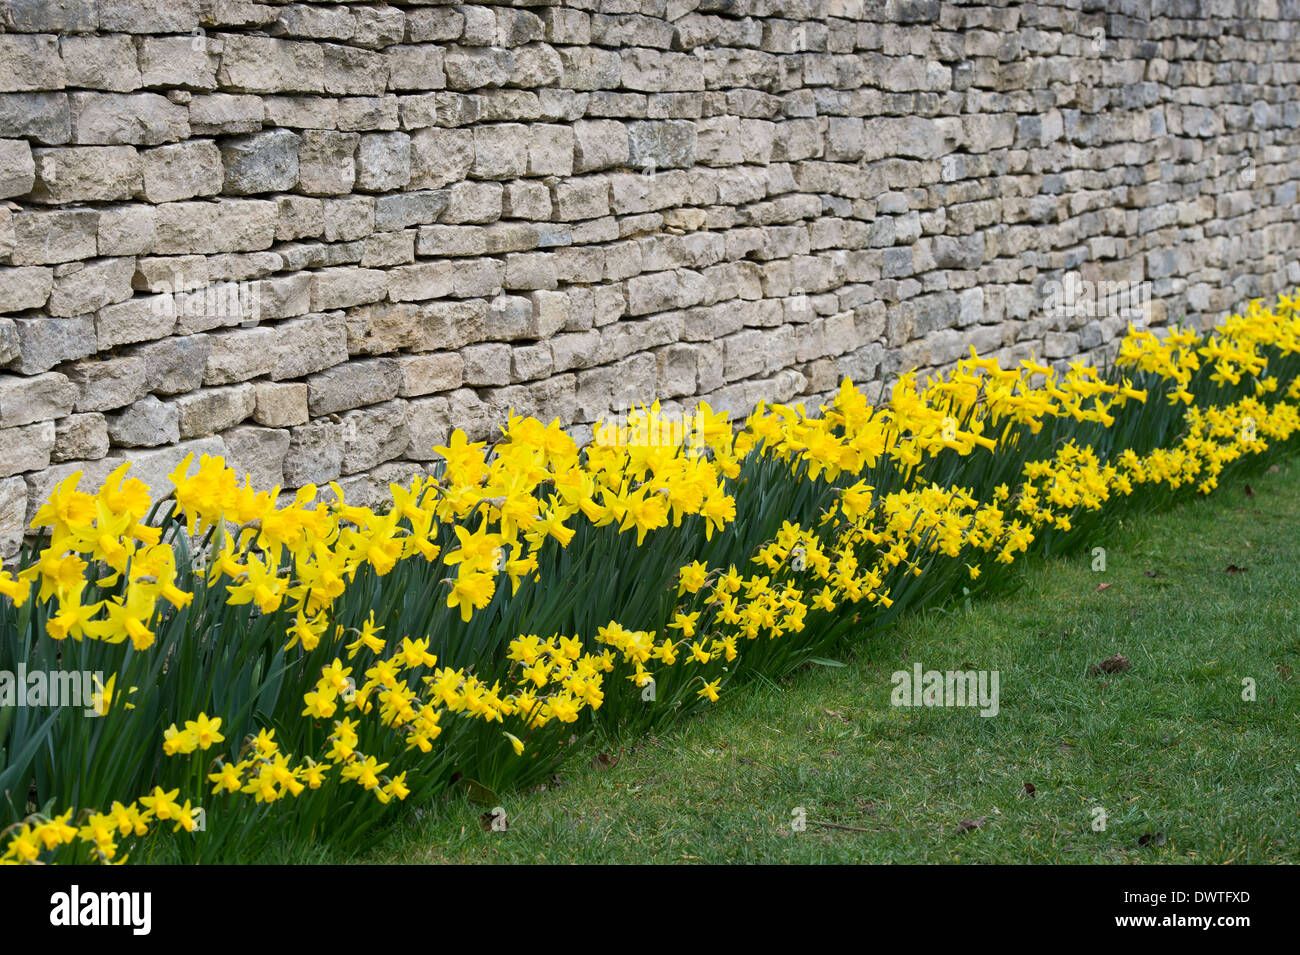 Daffodil flowers against a cotswold stone wall. Cotswolds, England Stock Photo